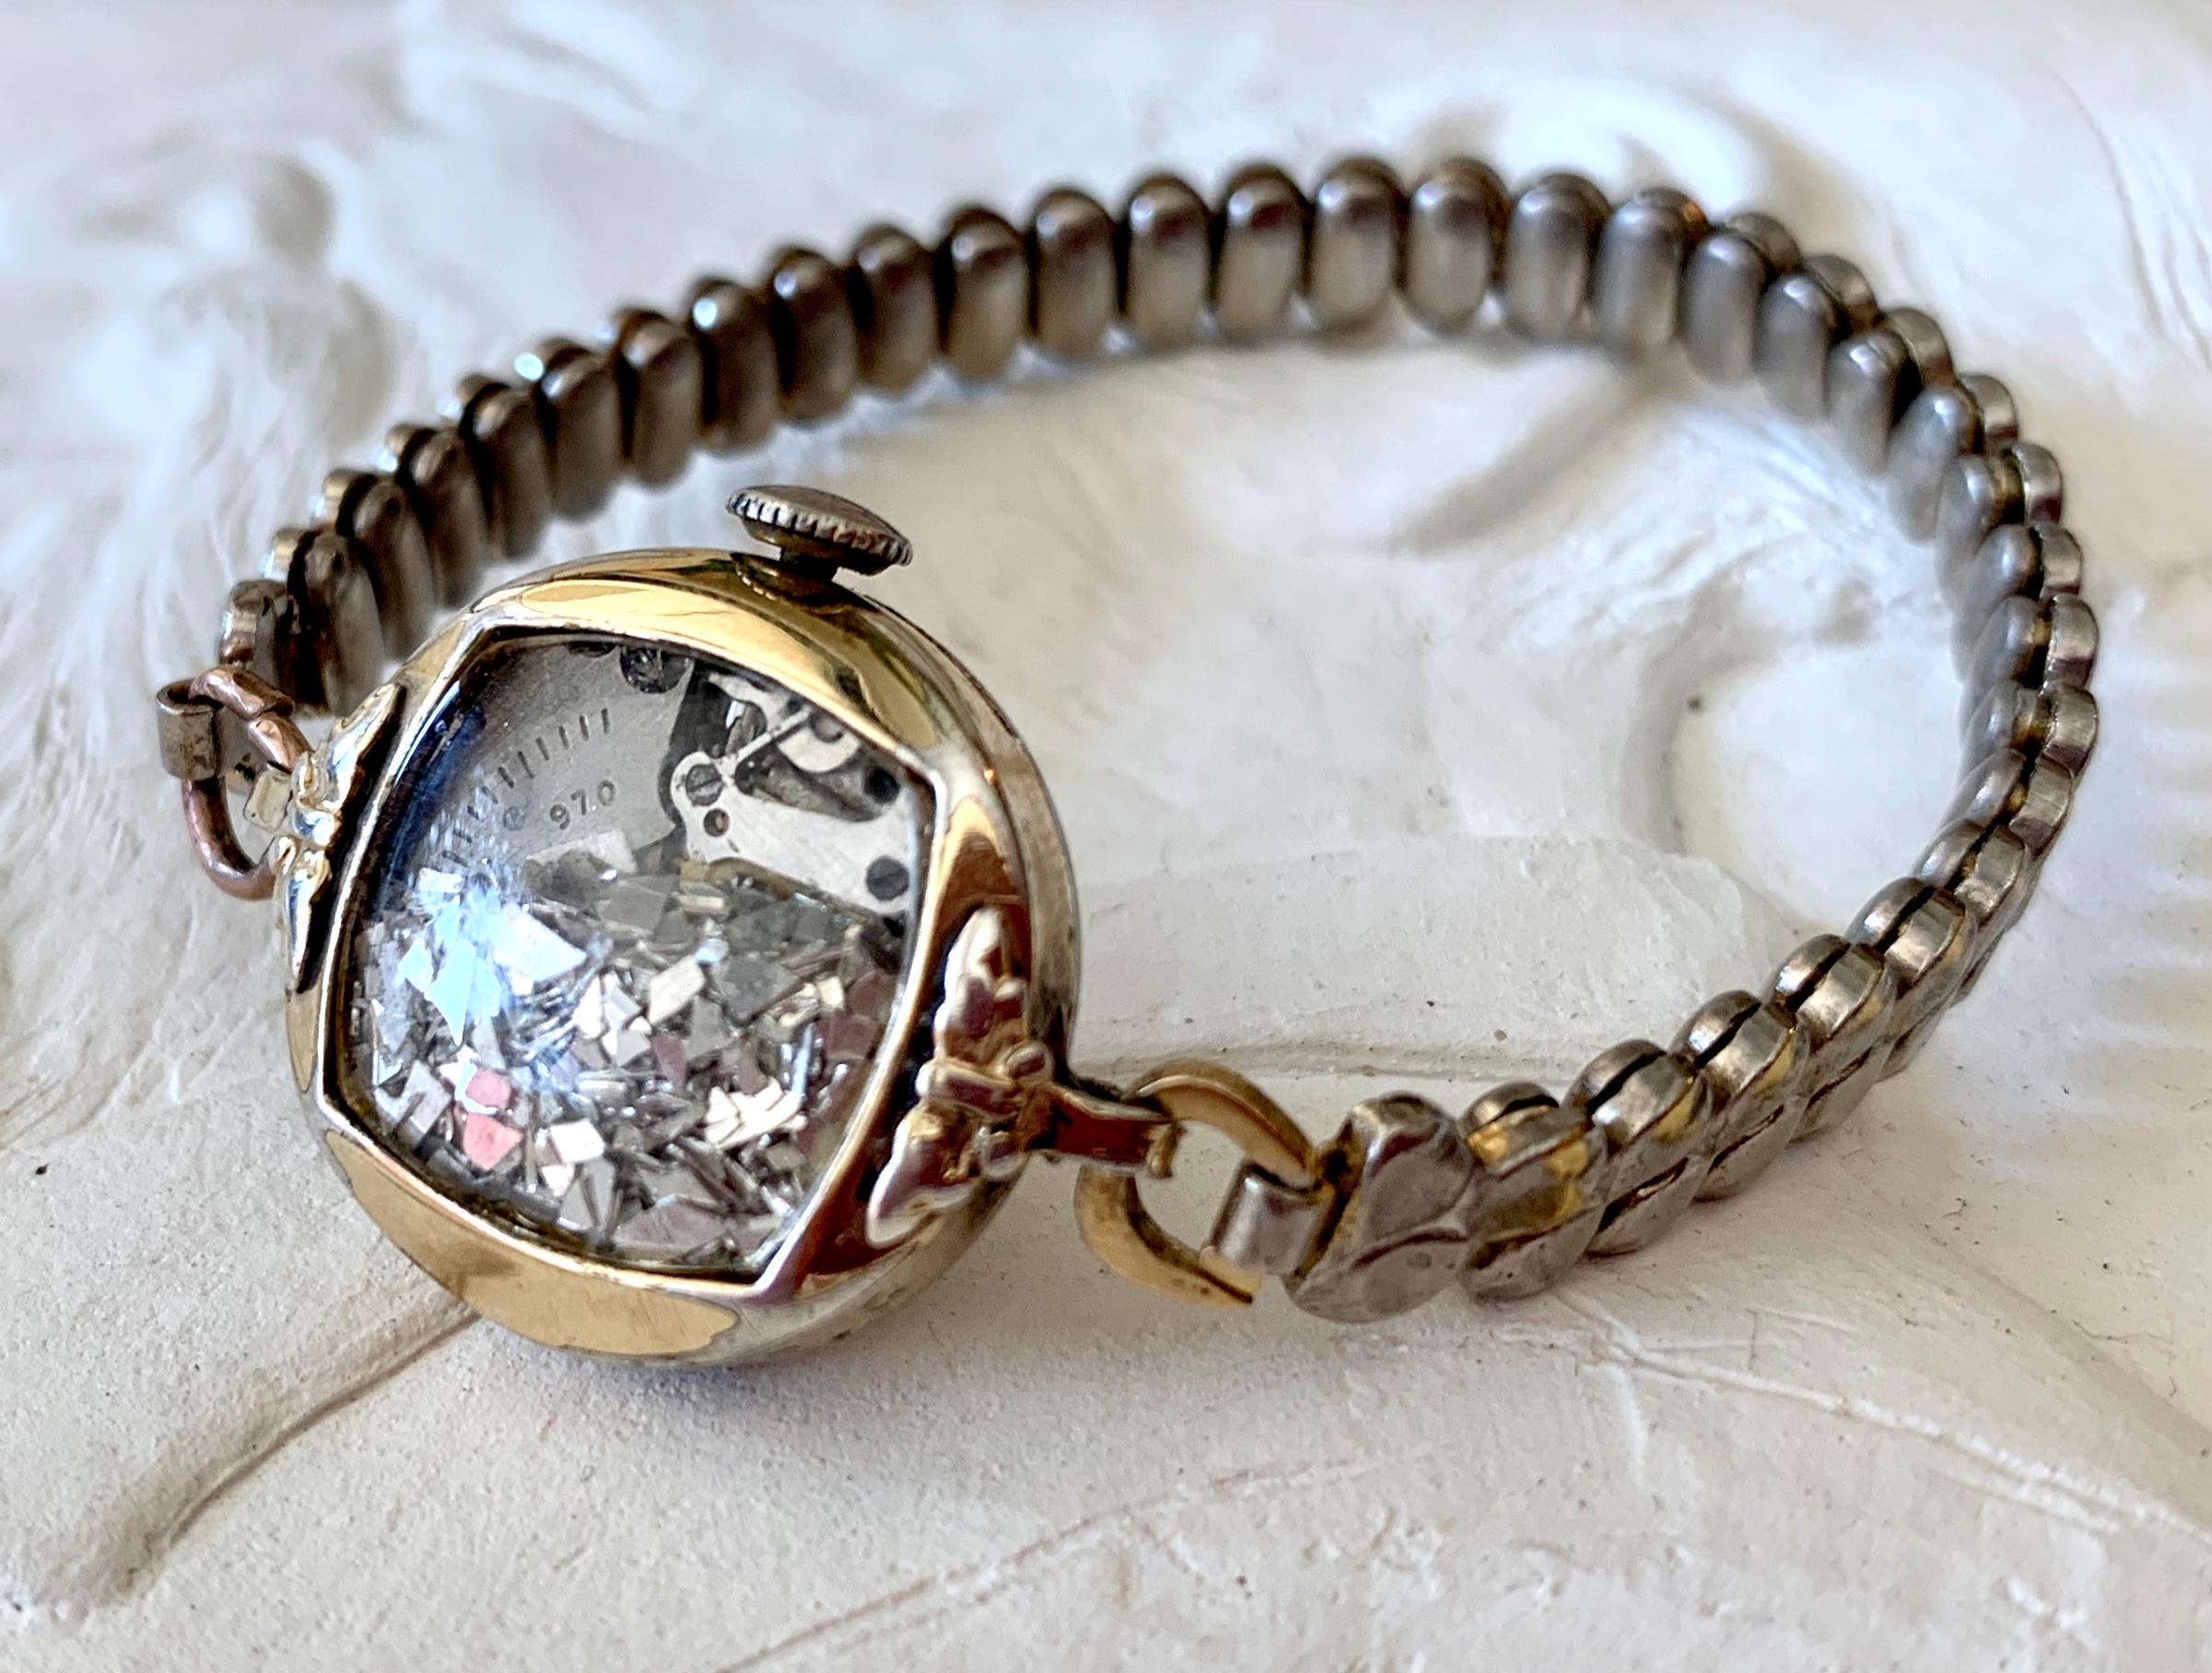 The Fairydust band is a non-functioning antique watch  a symbol, a talisman,
to hold the intention of staying present, neither dwelling in
the past nor looking toward the future. The fairydust inside
are mirror shards, a shattering of the